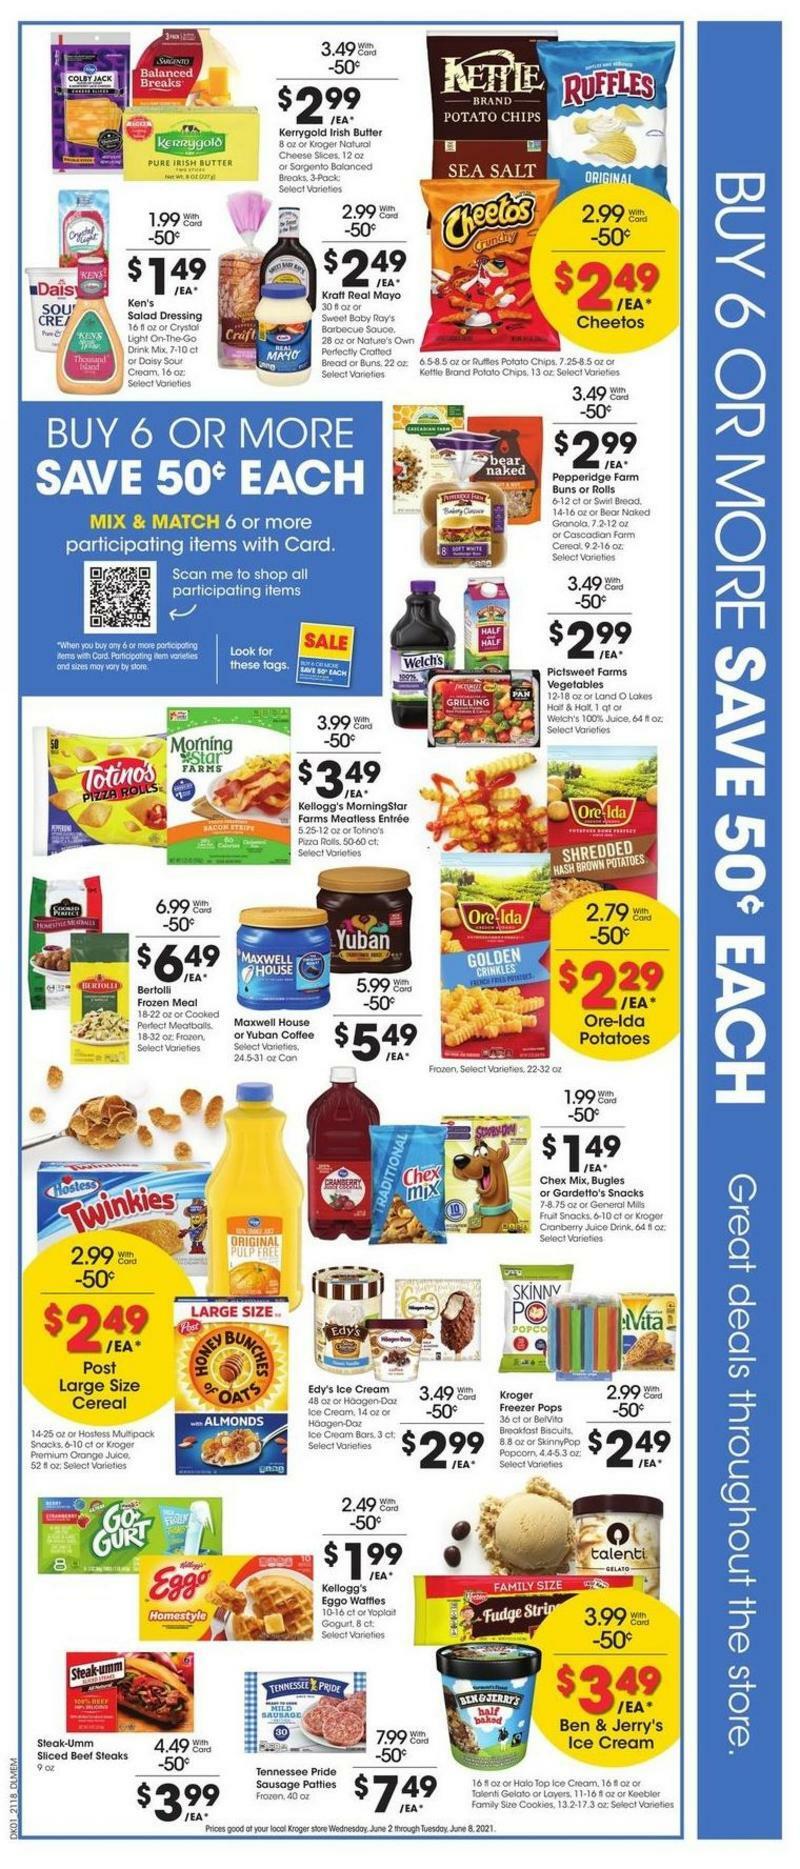 Kroger Weekly Ad from June 2